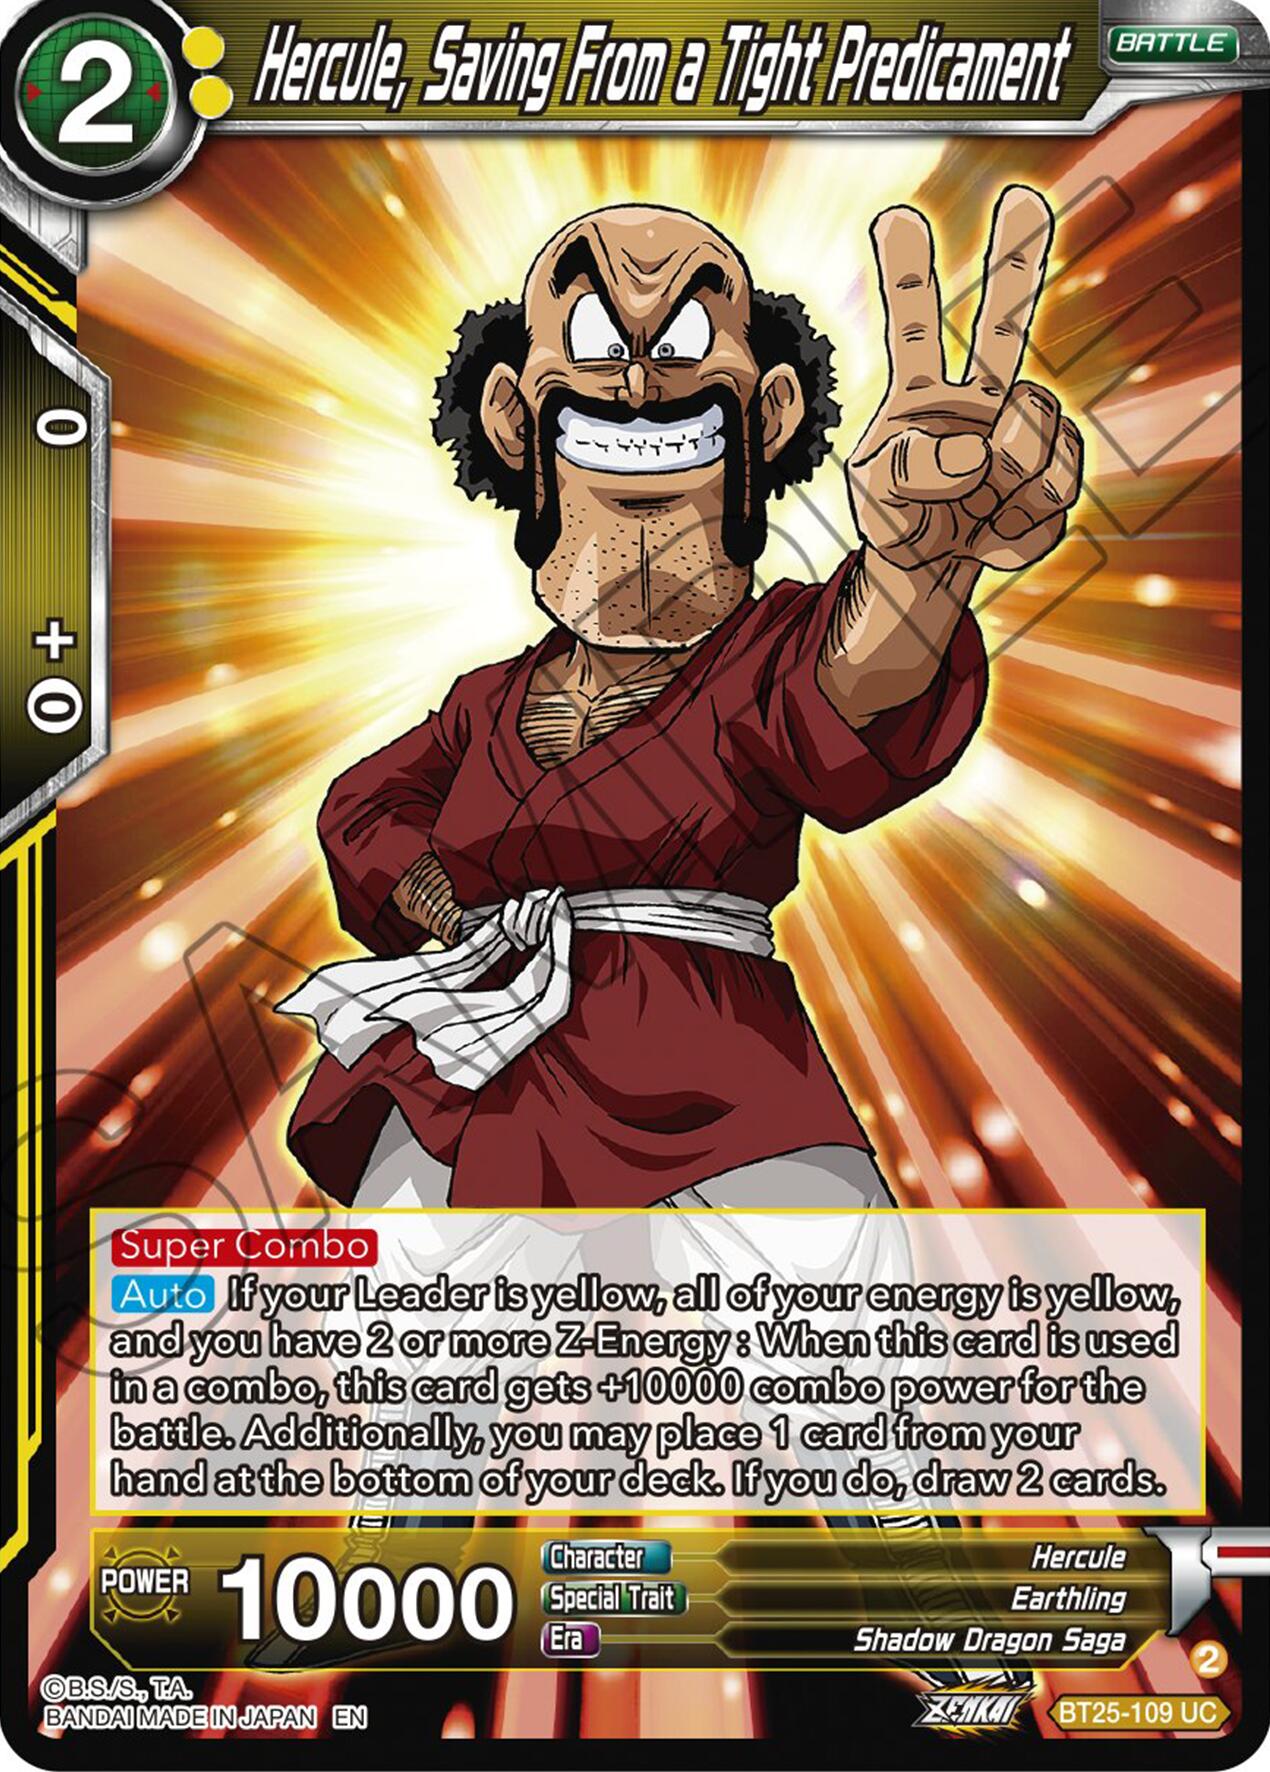 Hercule, Saving From a Tight Predicament (BT25-109 UC) [Legend of the Dragon Balls] | Total Play